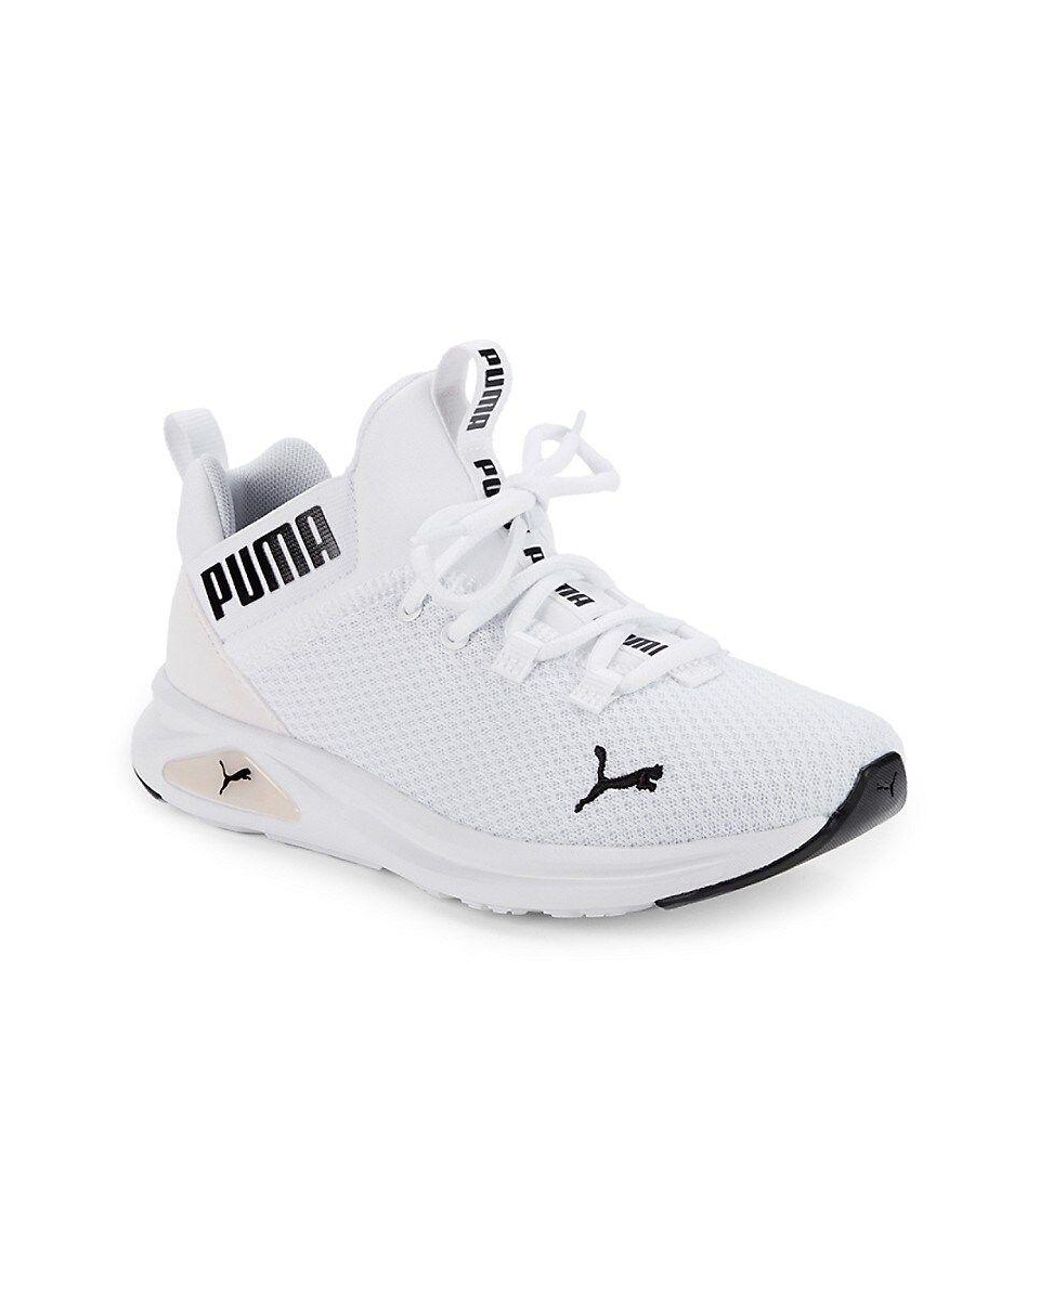 PUMA Enzo 2 Uncaged Mesh Running Shoes in White | Lyst